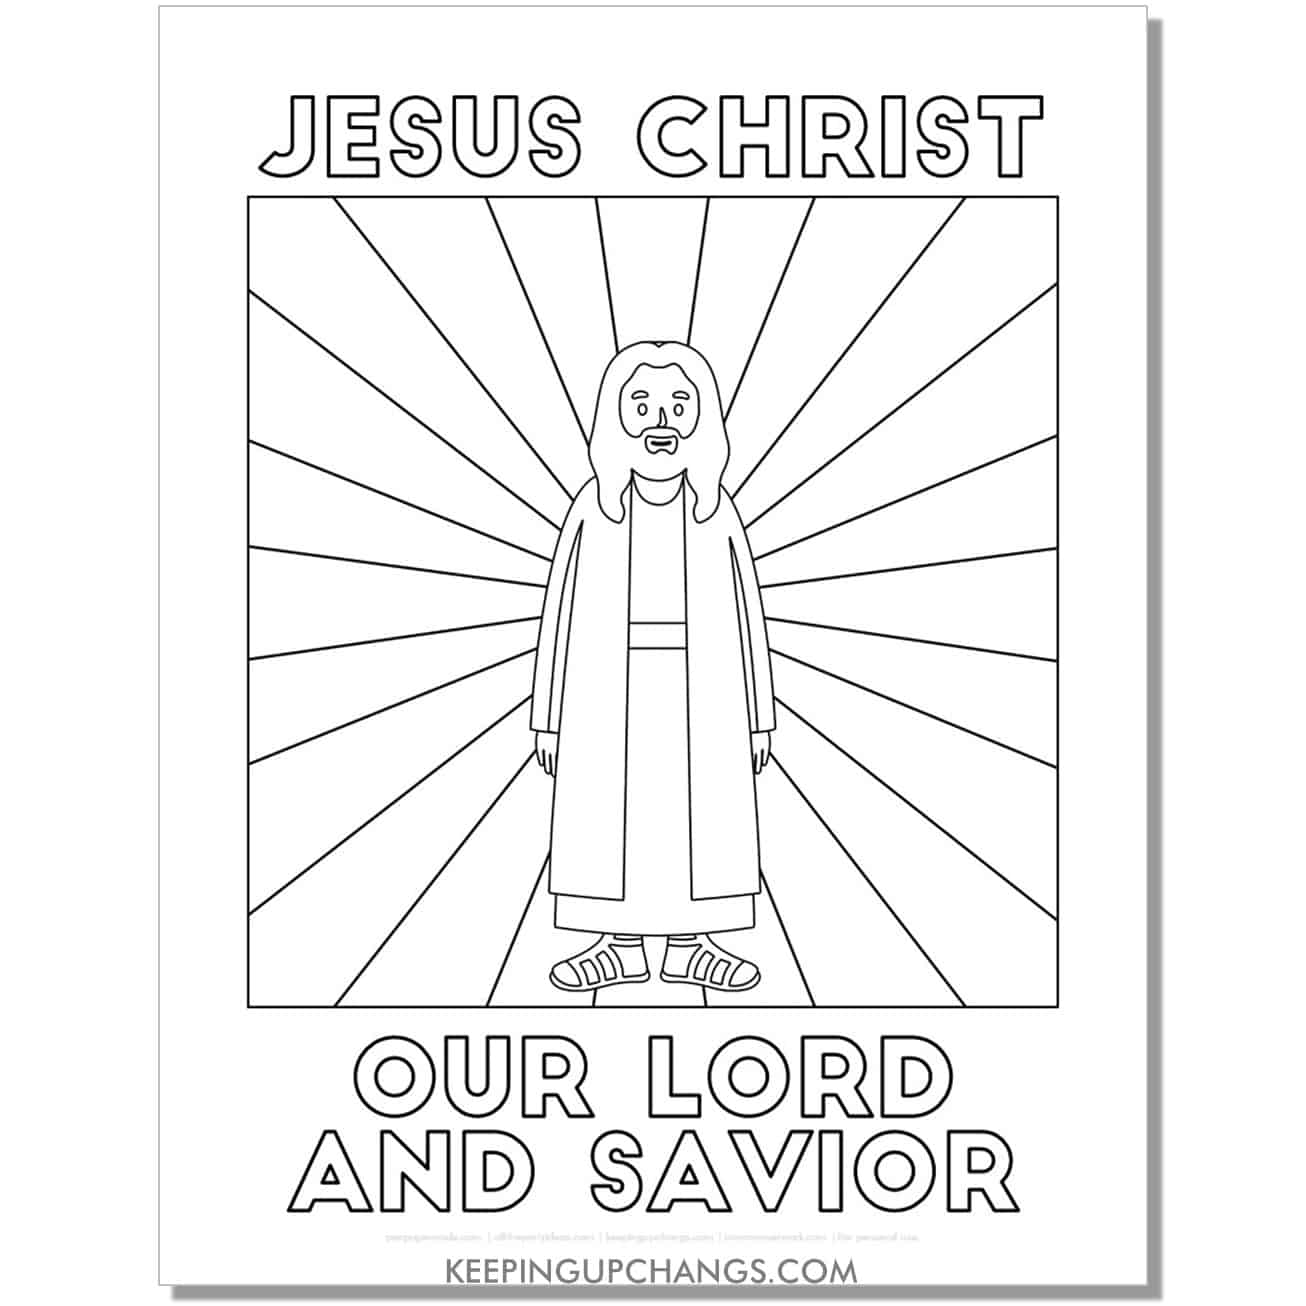 jesus christ, our lord and savior religious easter coloring page, sheet